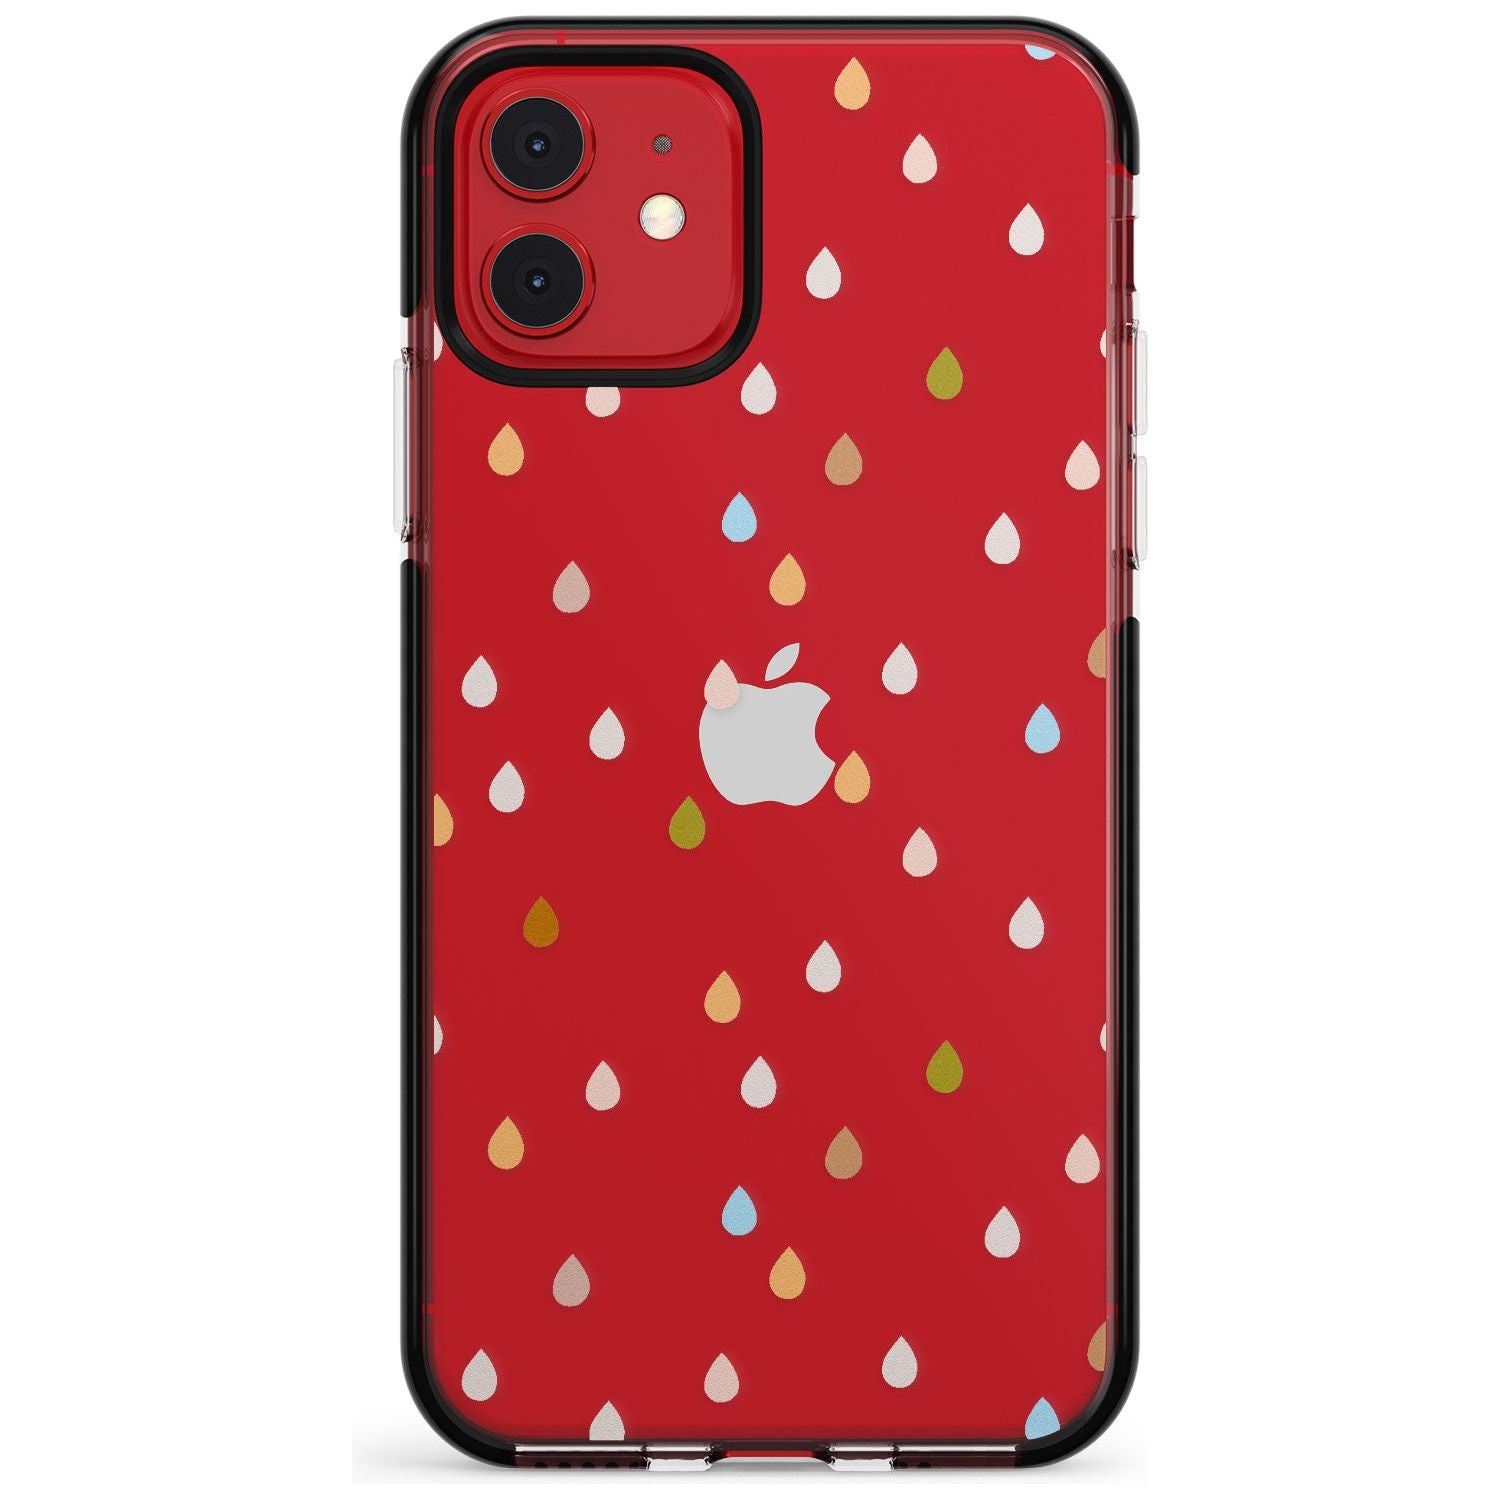 Raindrops Pink Fade Impact Phone Case for iPhone 11 Pro Max